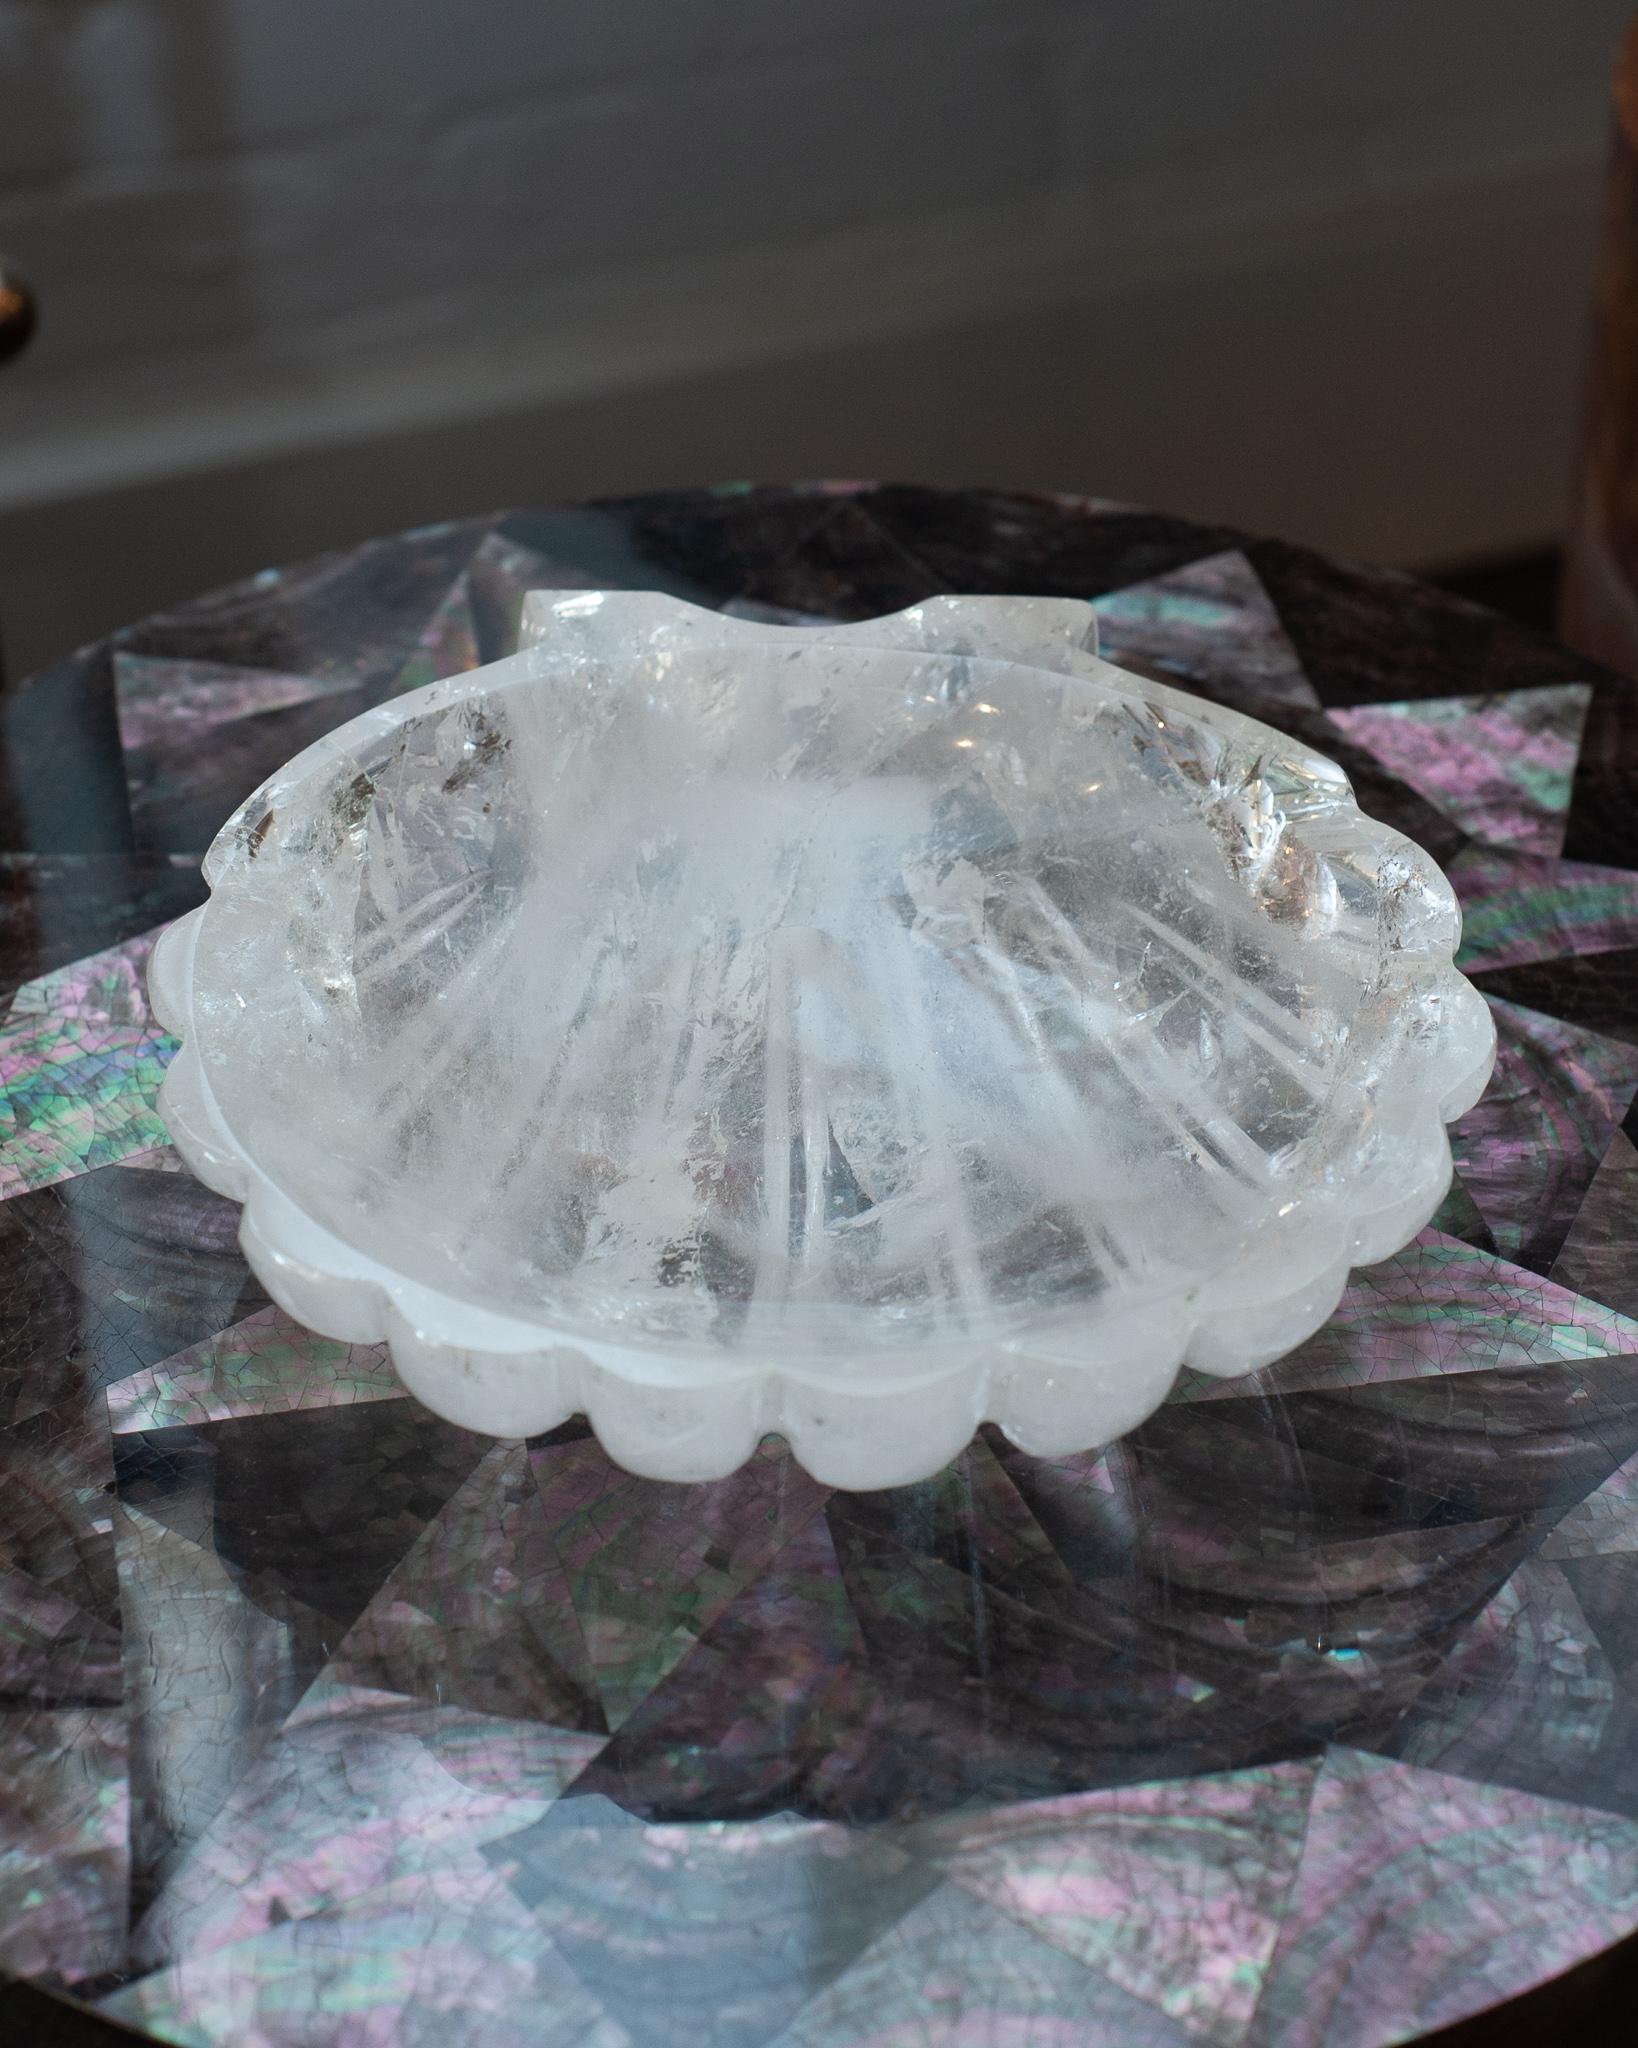 A beautiful hand carved shell tray in natural, clear rock crystal quartz. Finely carved from a super clear quality of rock crystal and polished to a brilliant high gloss finish. A stunning accessory for any tabletop. Hand carved in Minas Gerais,